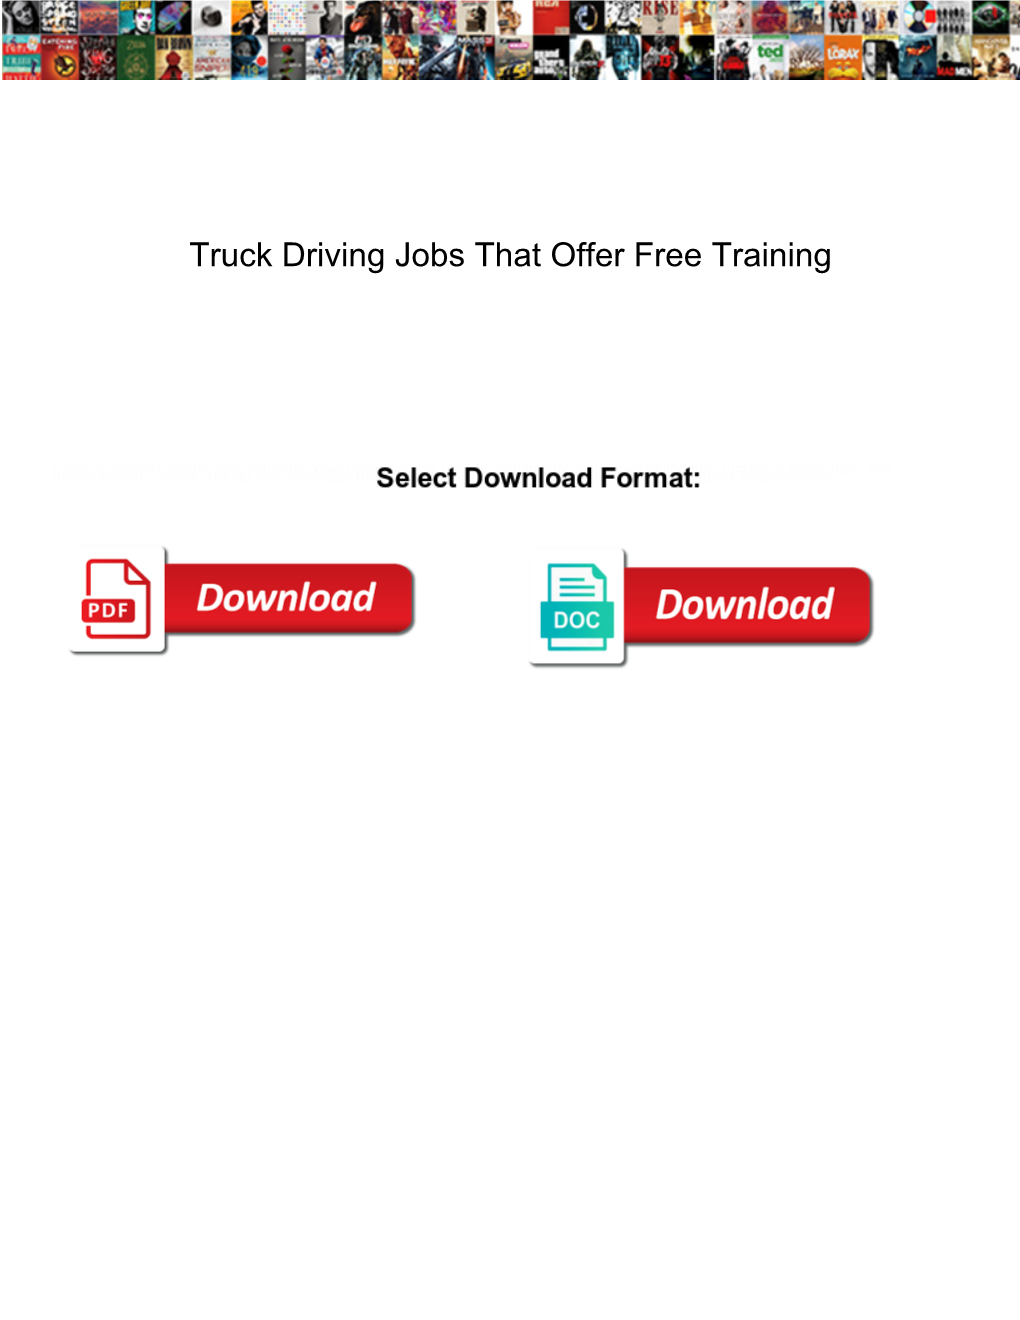 Truck Driving Jobs That Offer Free Training